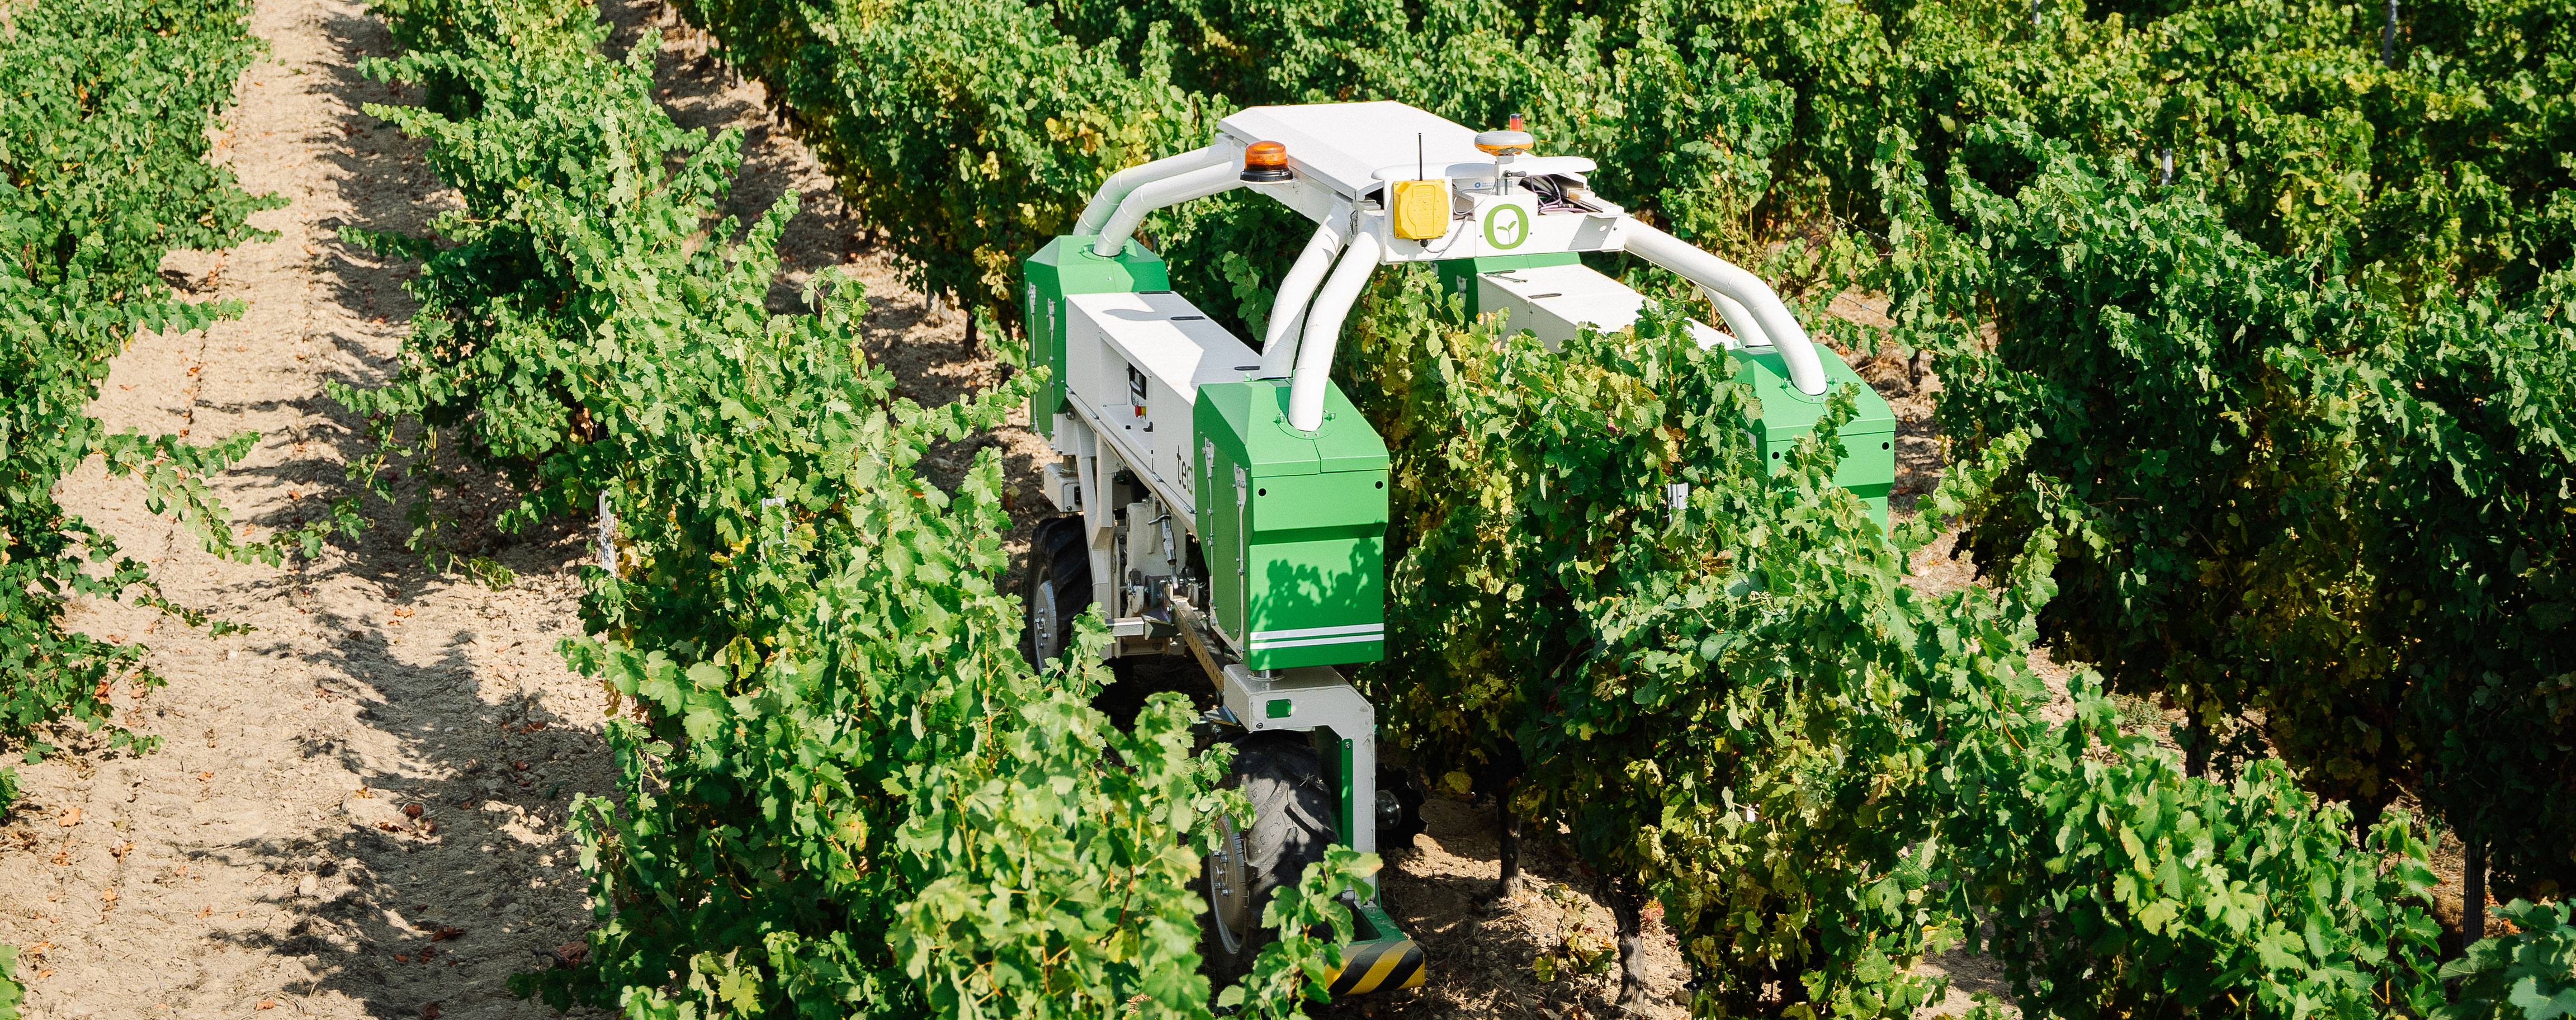 besked makeup nægte Updated robot roams French vineyards